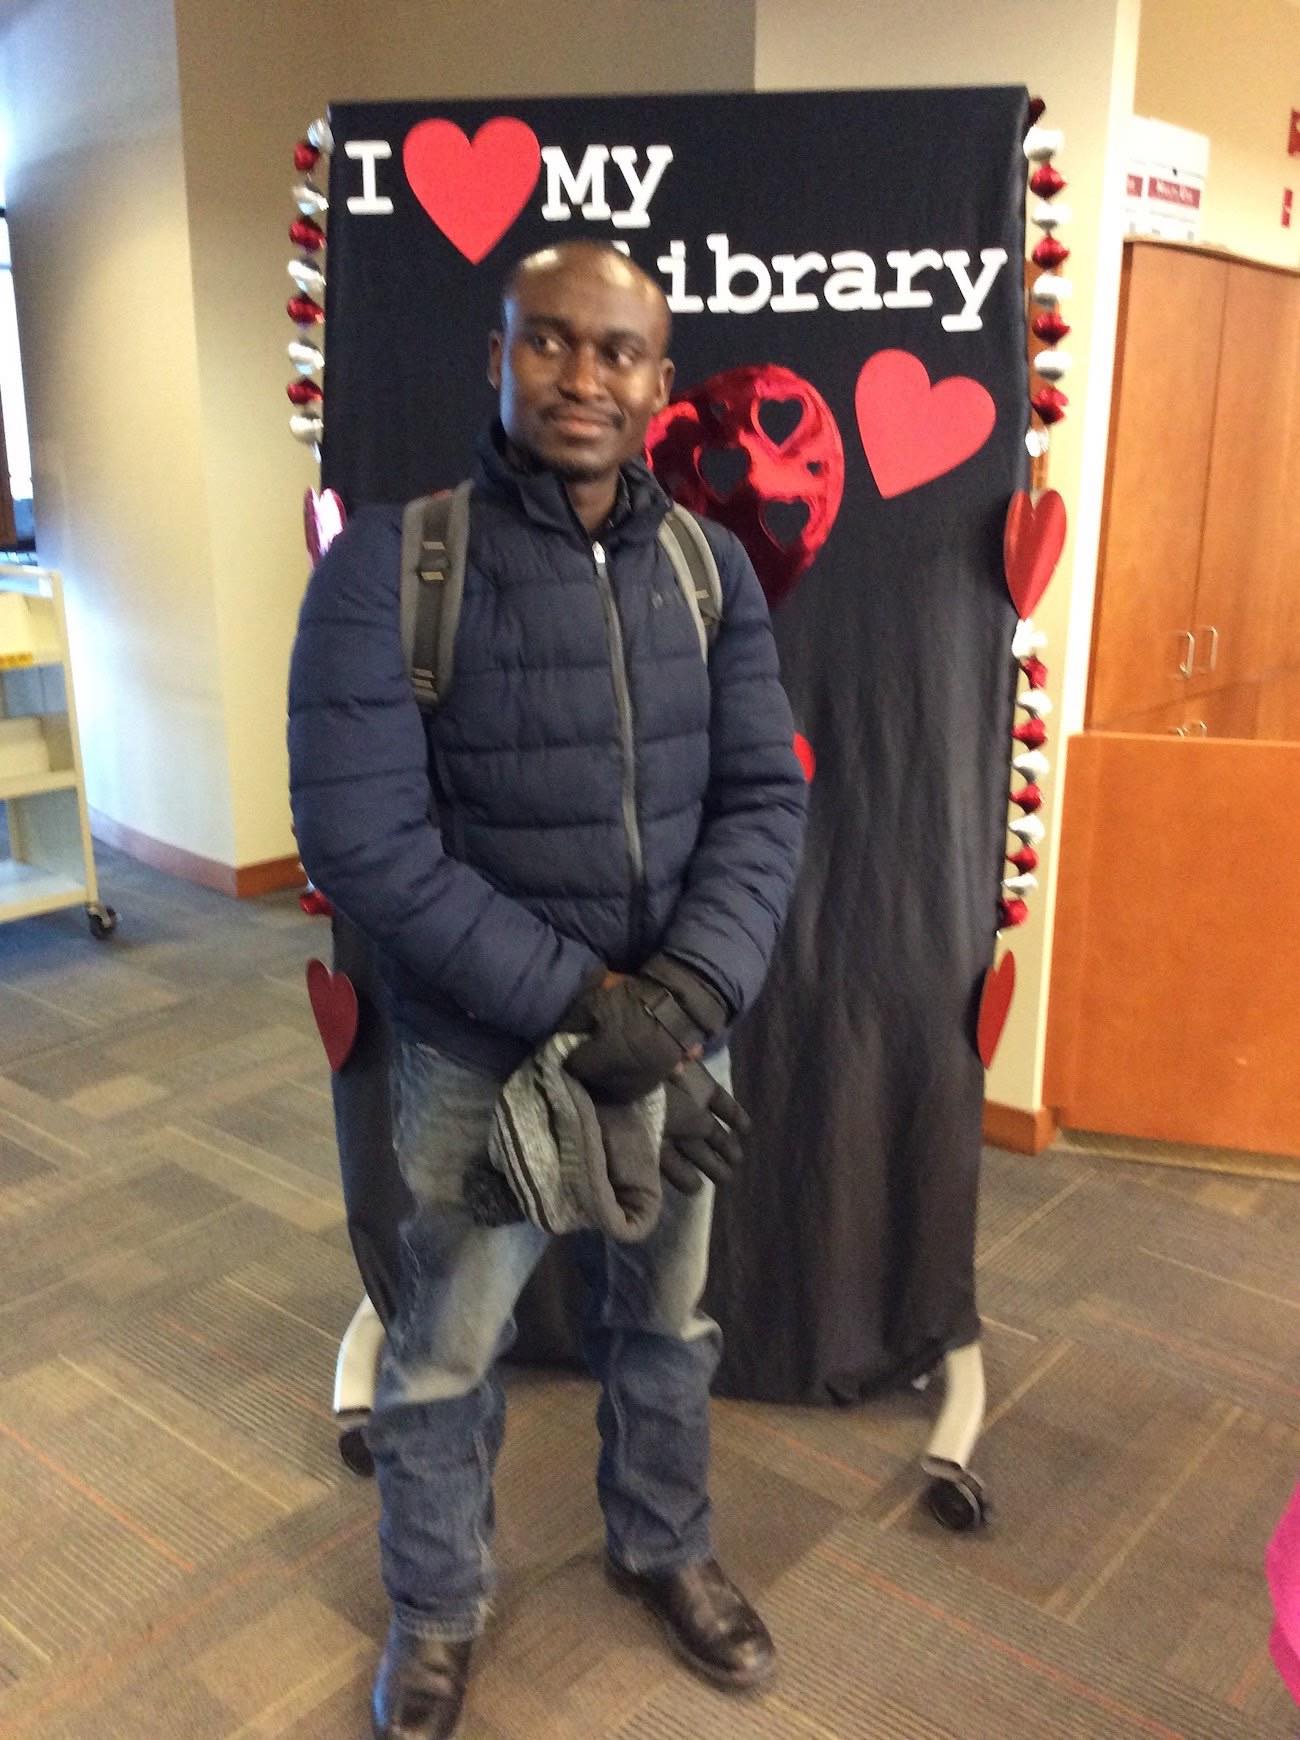 A student in winter gear stands in front of the I love my library backdrop, looking off to one side.